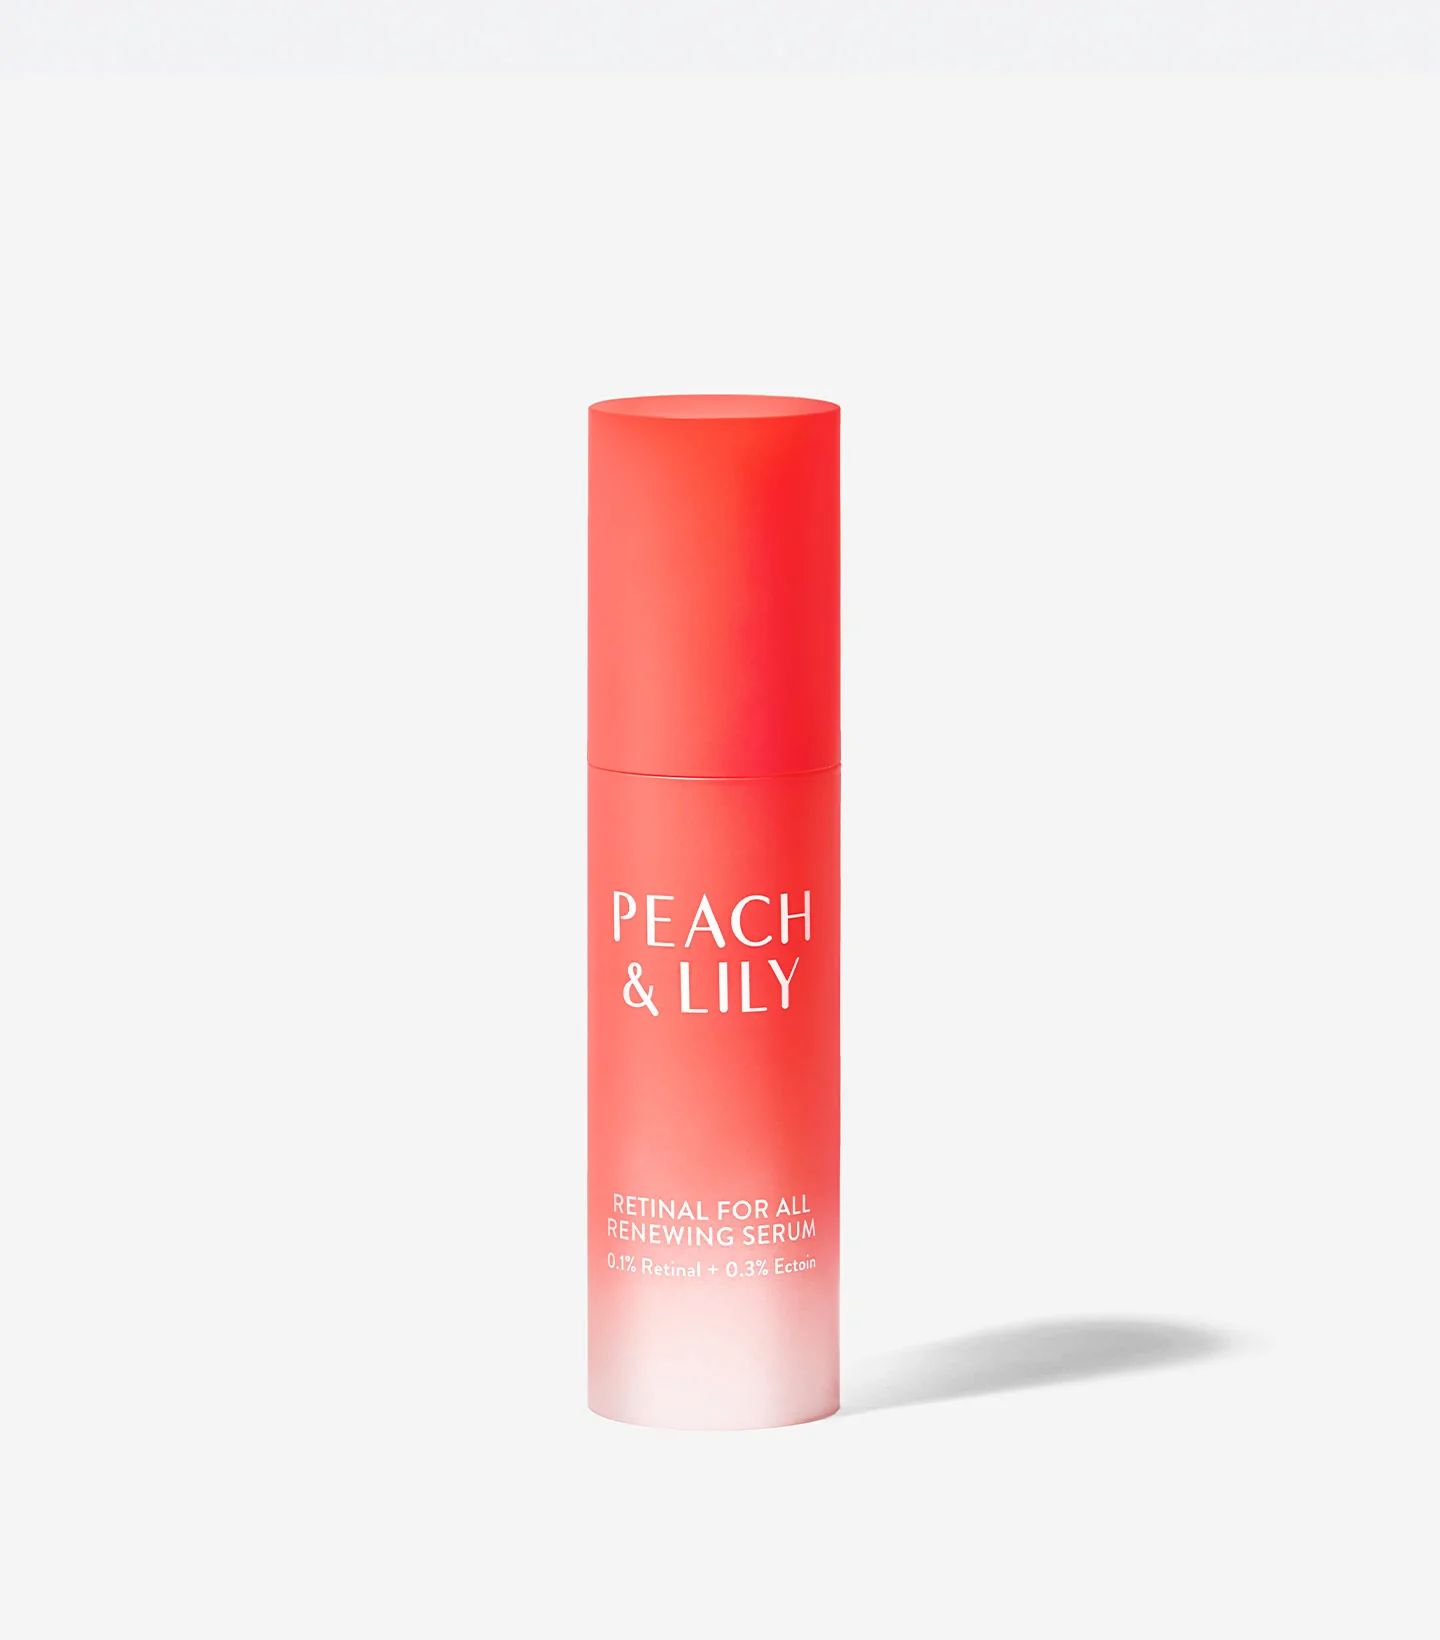 Retinal For All Renewing Serum | Peach and Lily, Inc.